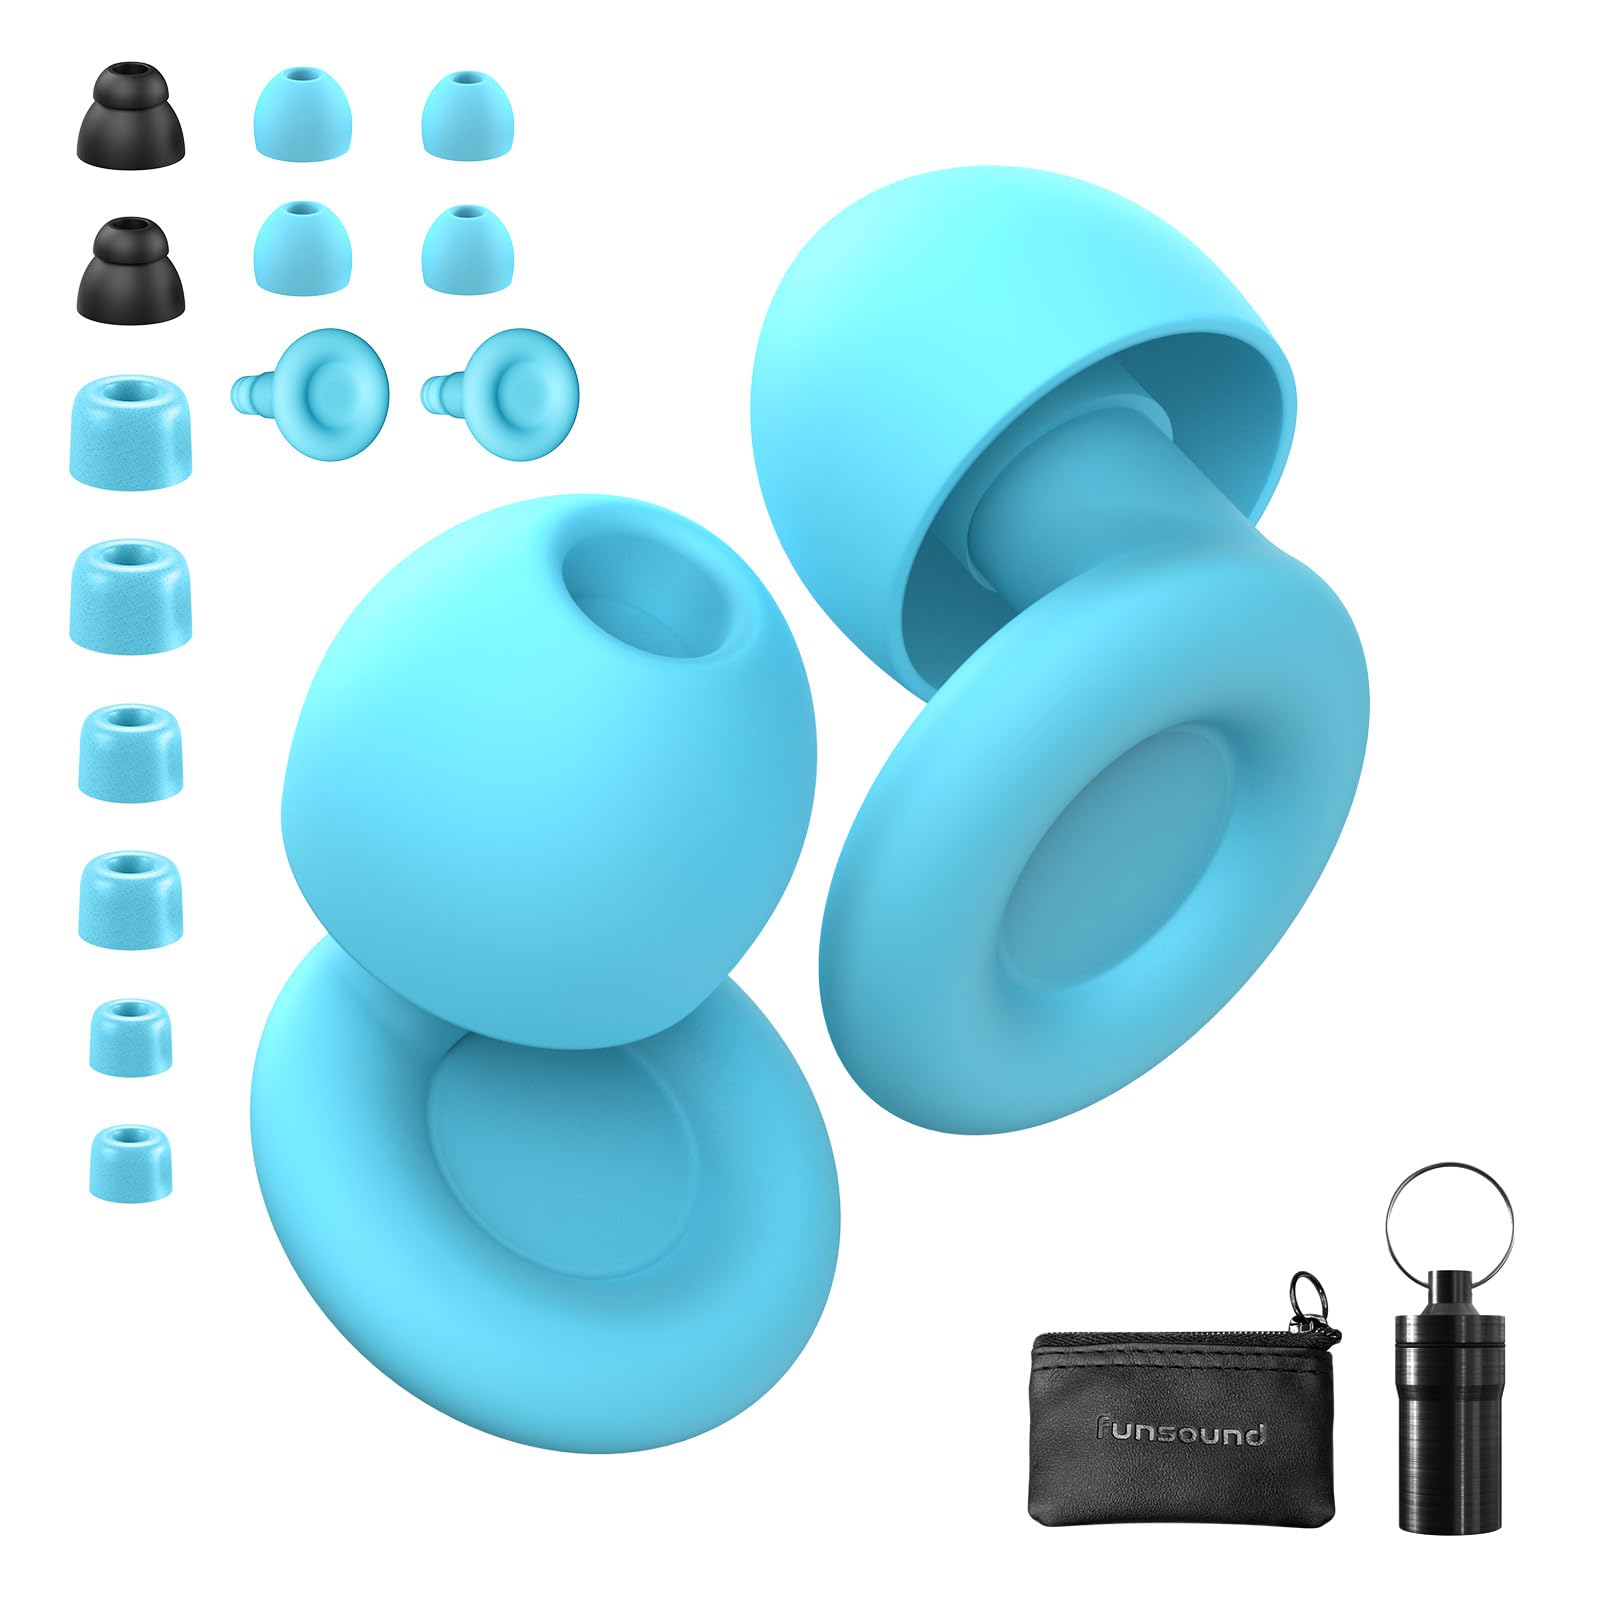 Ear Plugs for Sleeping Noise Reduction Reuseable, Concerts, Focus, Travel, Work, High Fidelity – 7 Pairs Eartips – Flexible Soft-Touch – NRR of 24 and 27 dB Noise Cancelling (Blue)